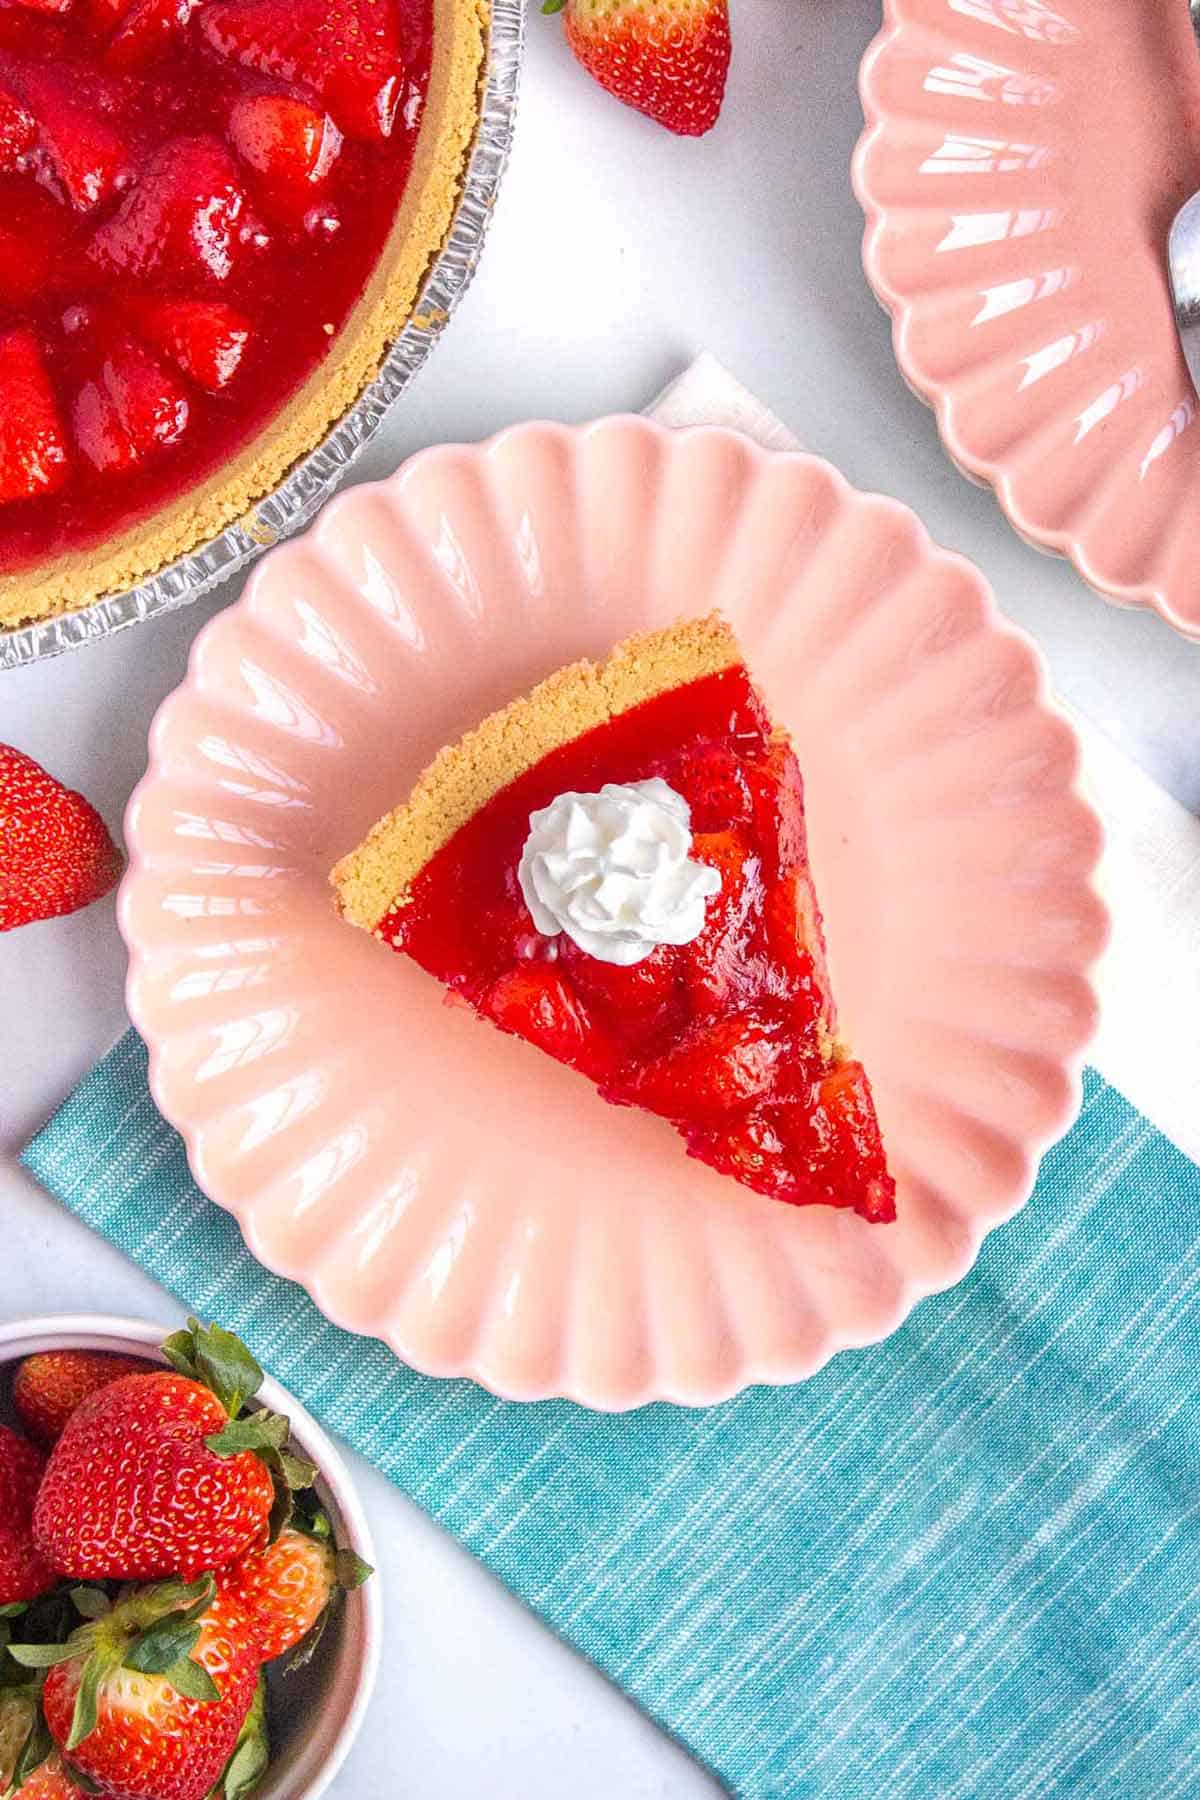 Slice of strawberry jello pie on a small plated topped with a dollop of whipped cream.